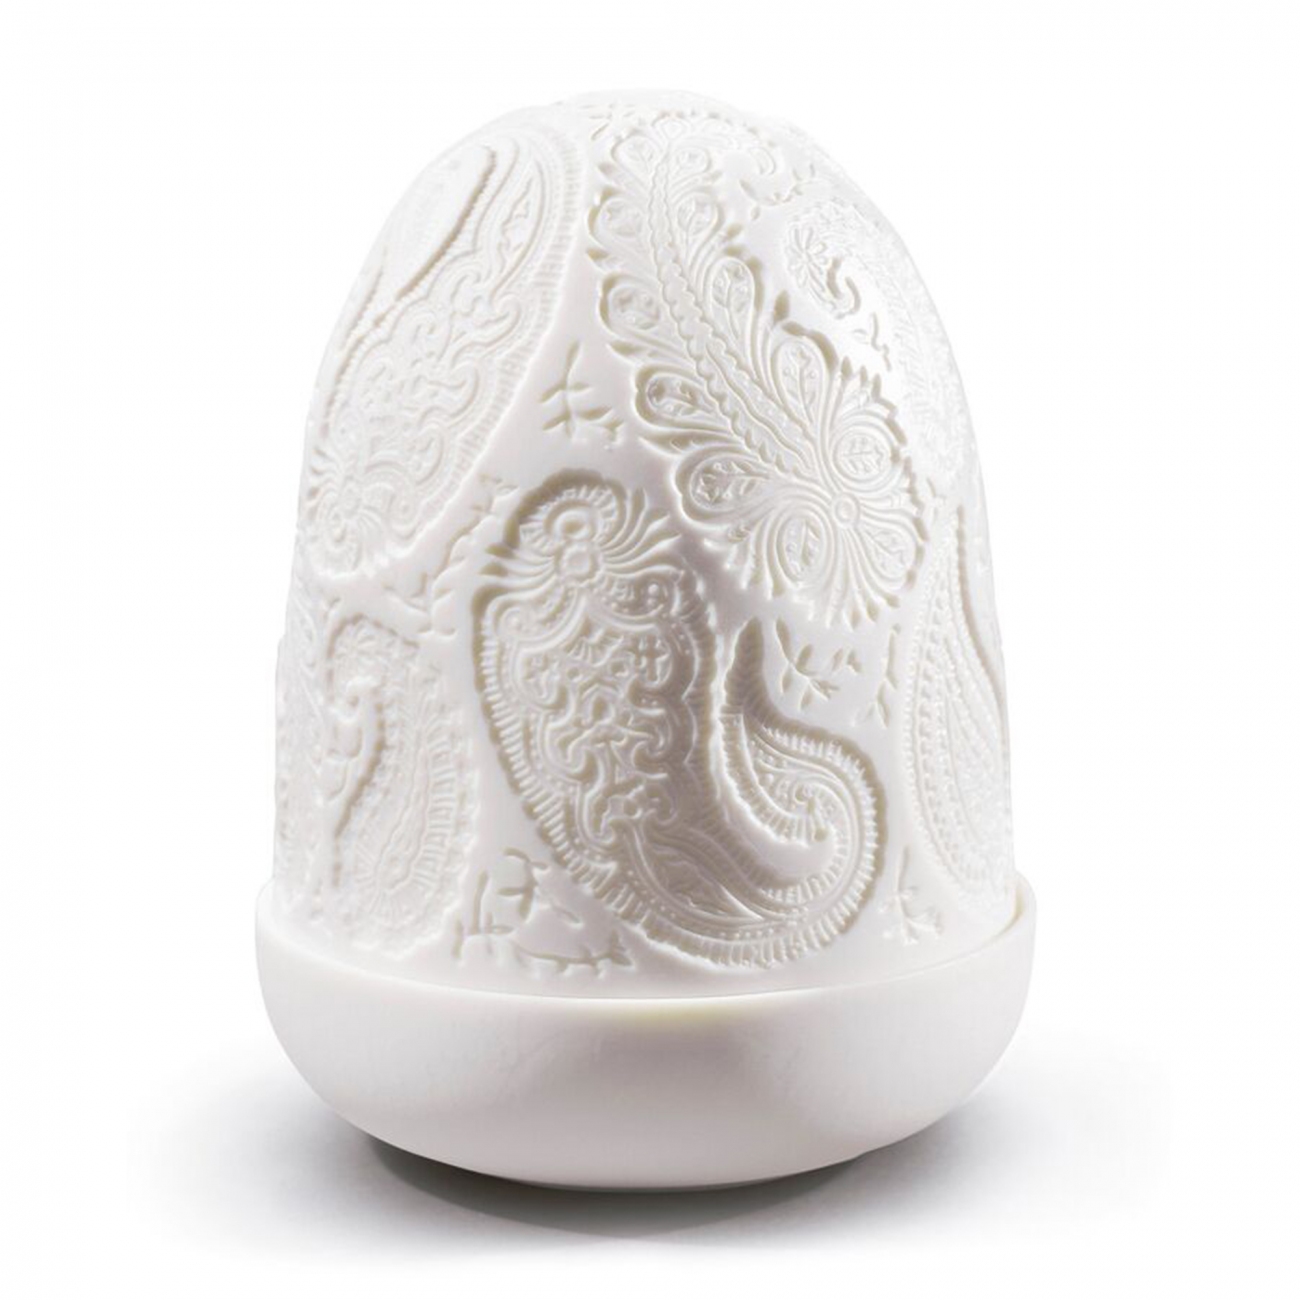 Lladró Paisley Dome Table lamp